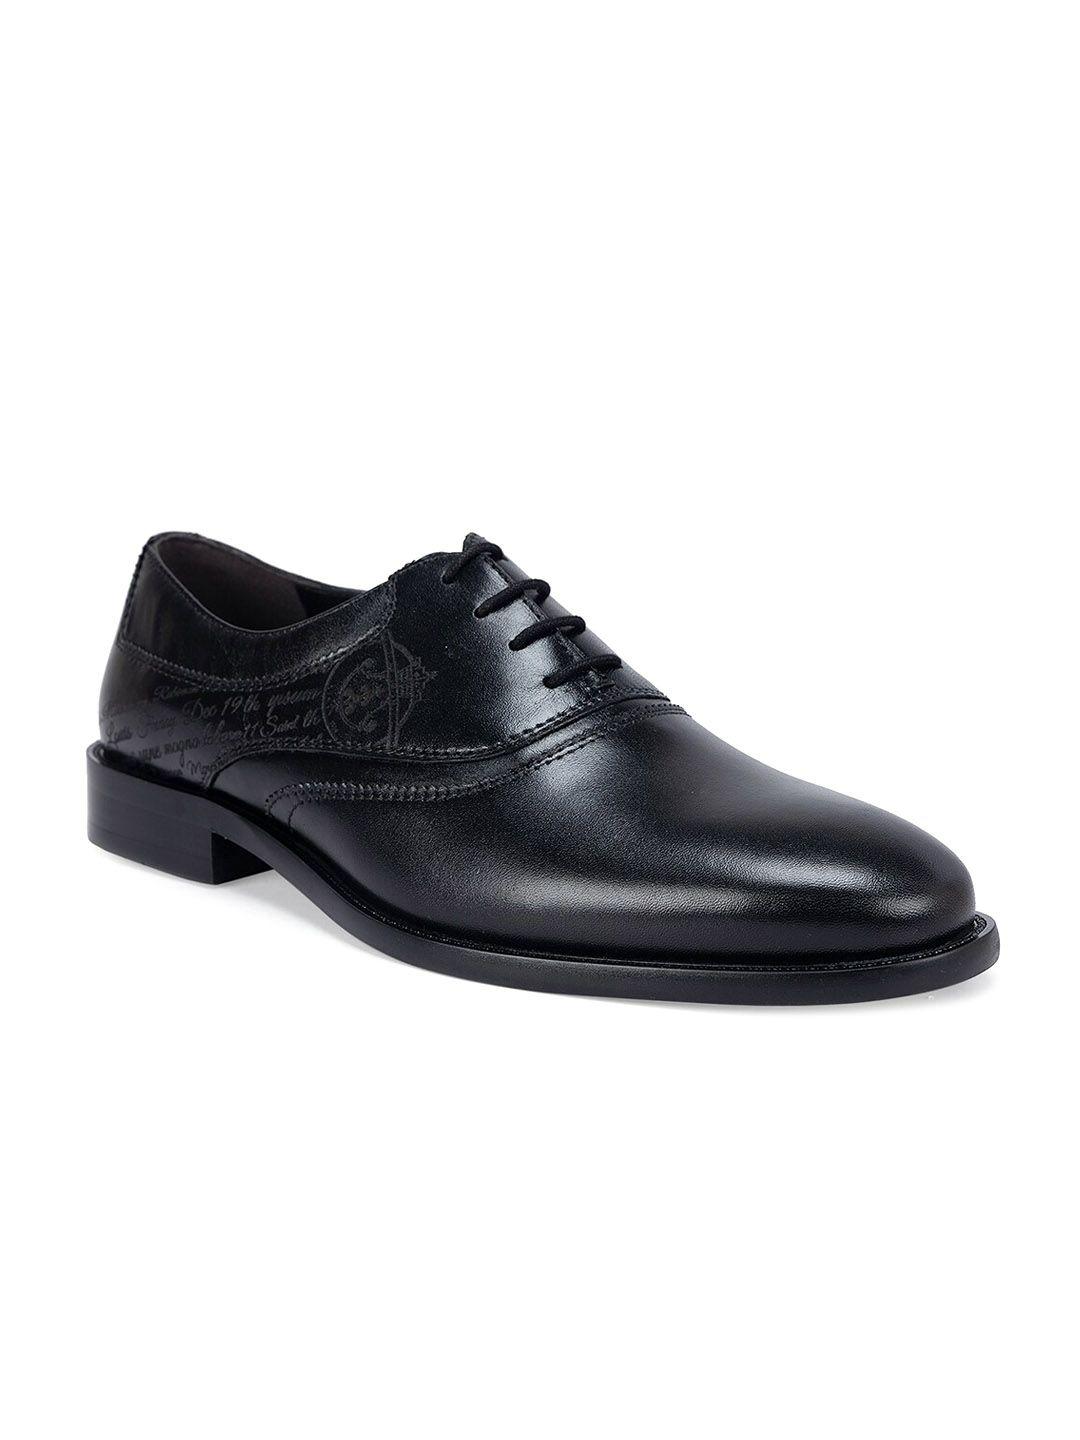 rosso-brunello-men-textured-leather-formal-oxfords